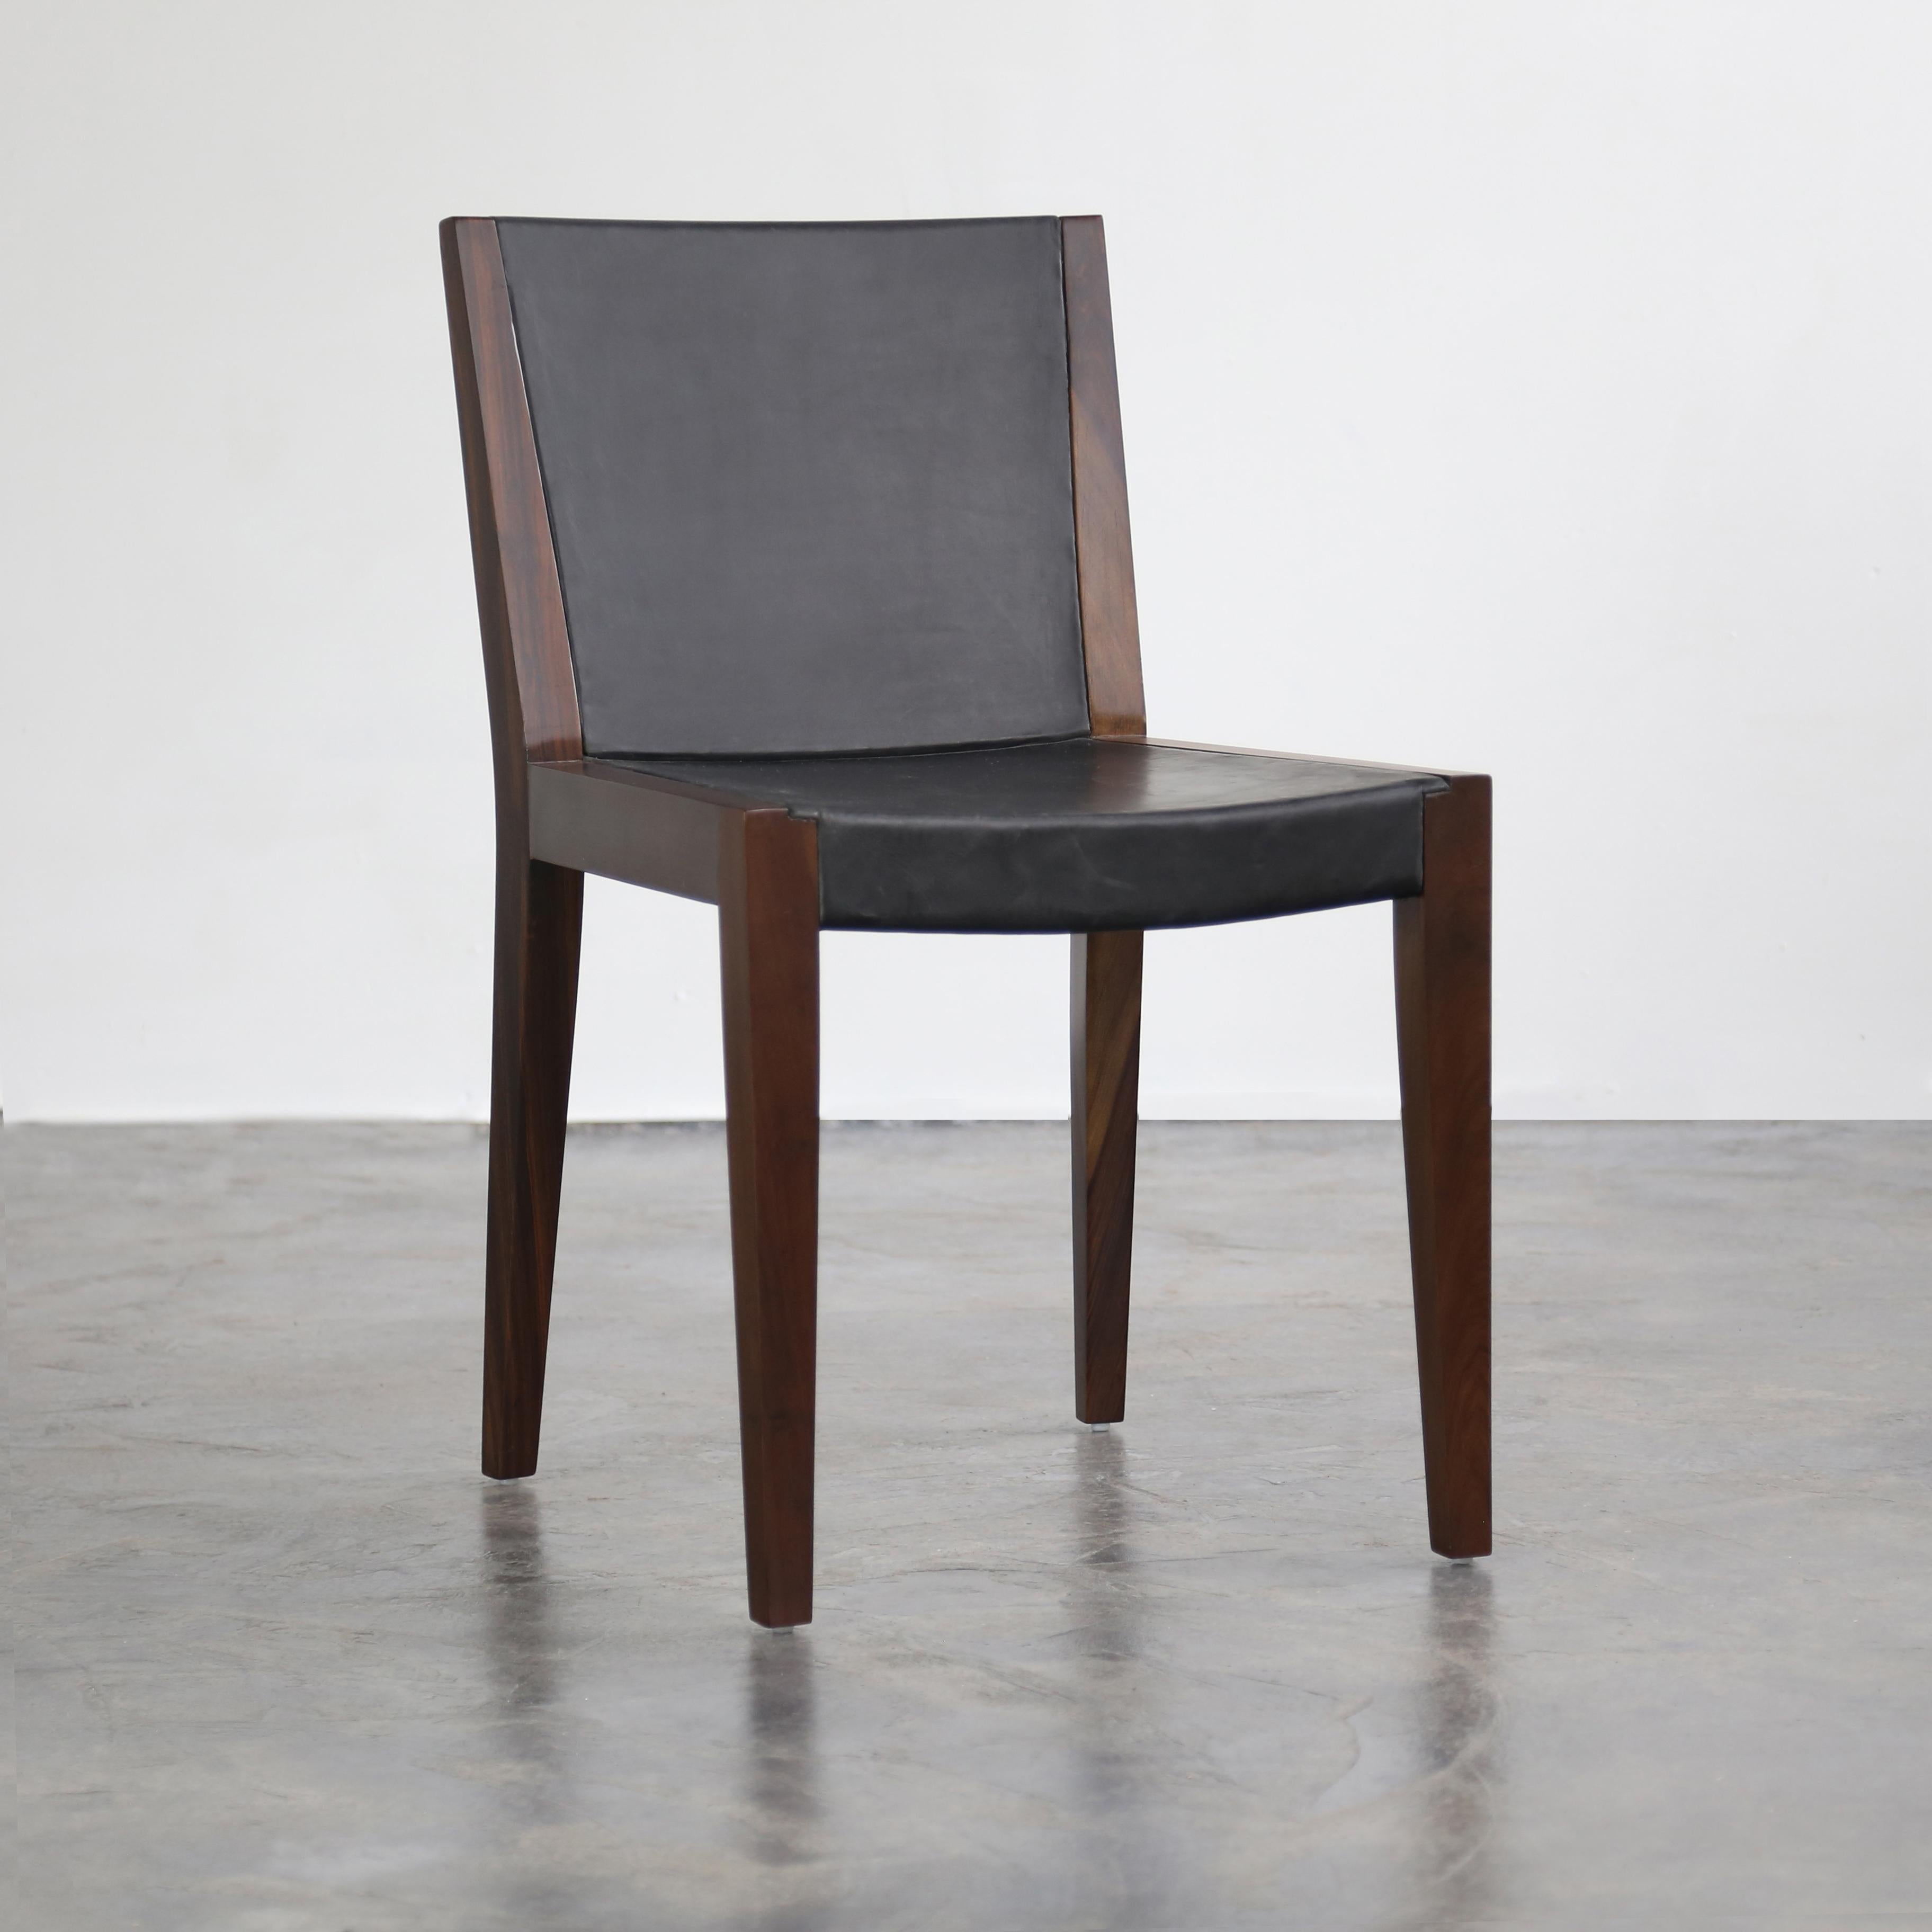 The Giovanni Chair is a decidely modern take on traditional woodworking methods. The gently curved, solid wood frame is partially wrapped in the leather of your choice to create a subtle dialogue between these two contrasting, yet rich